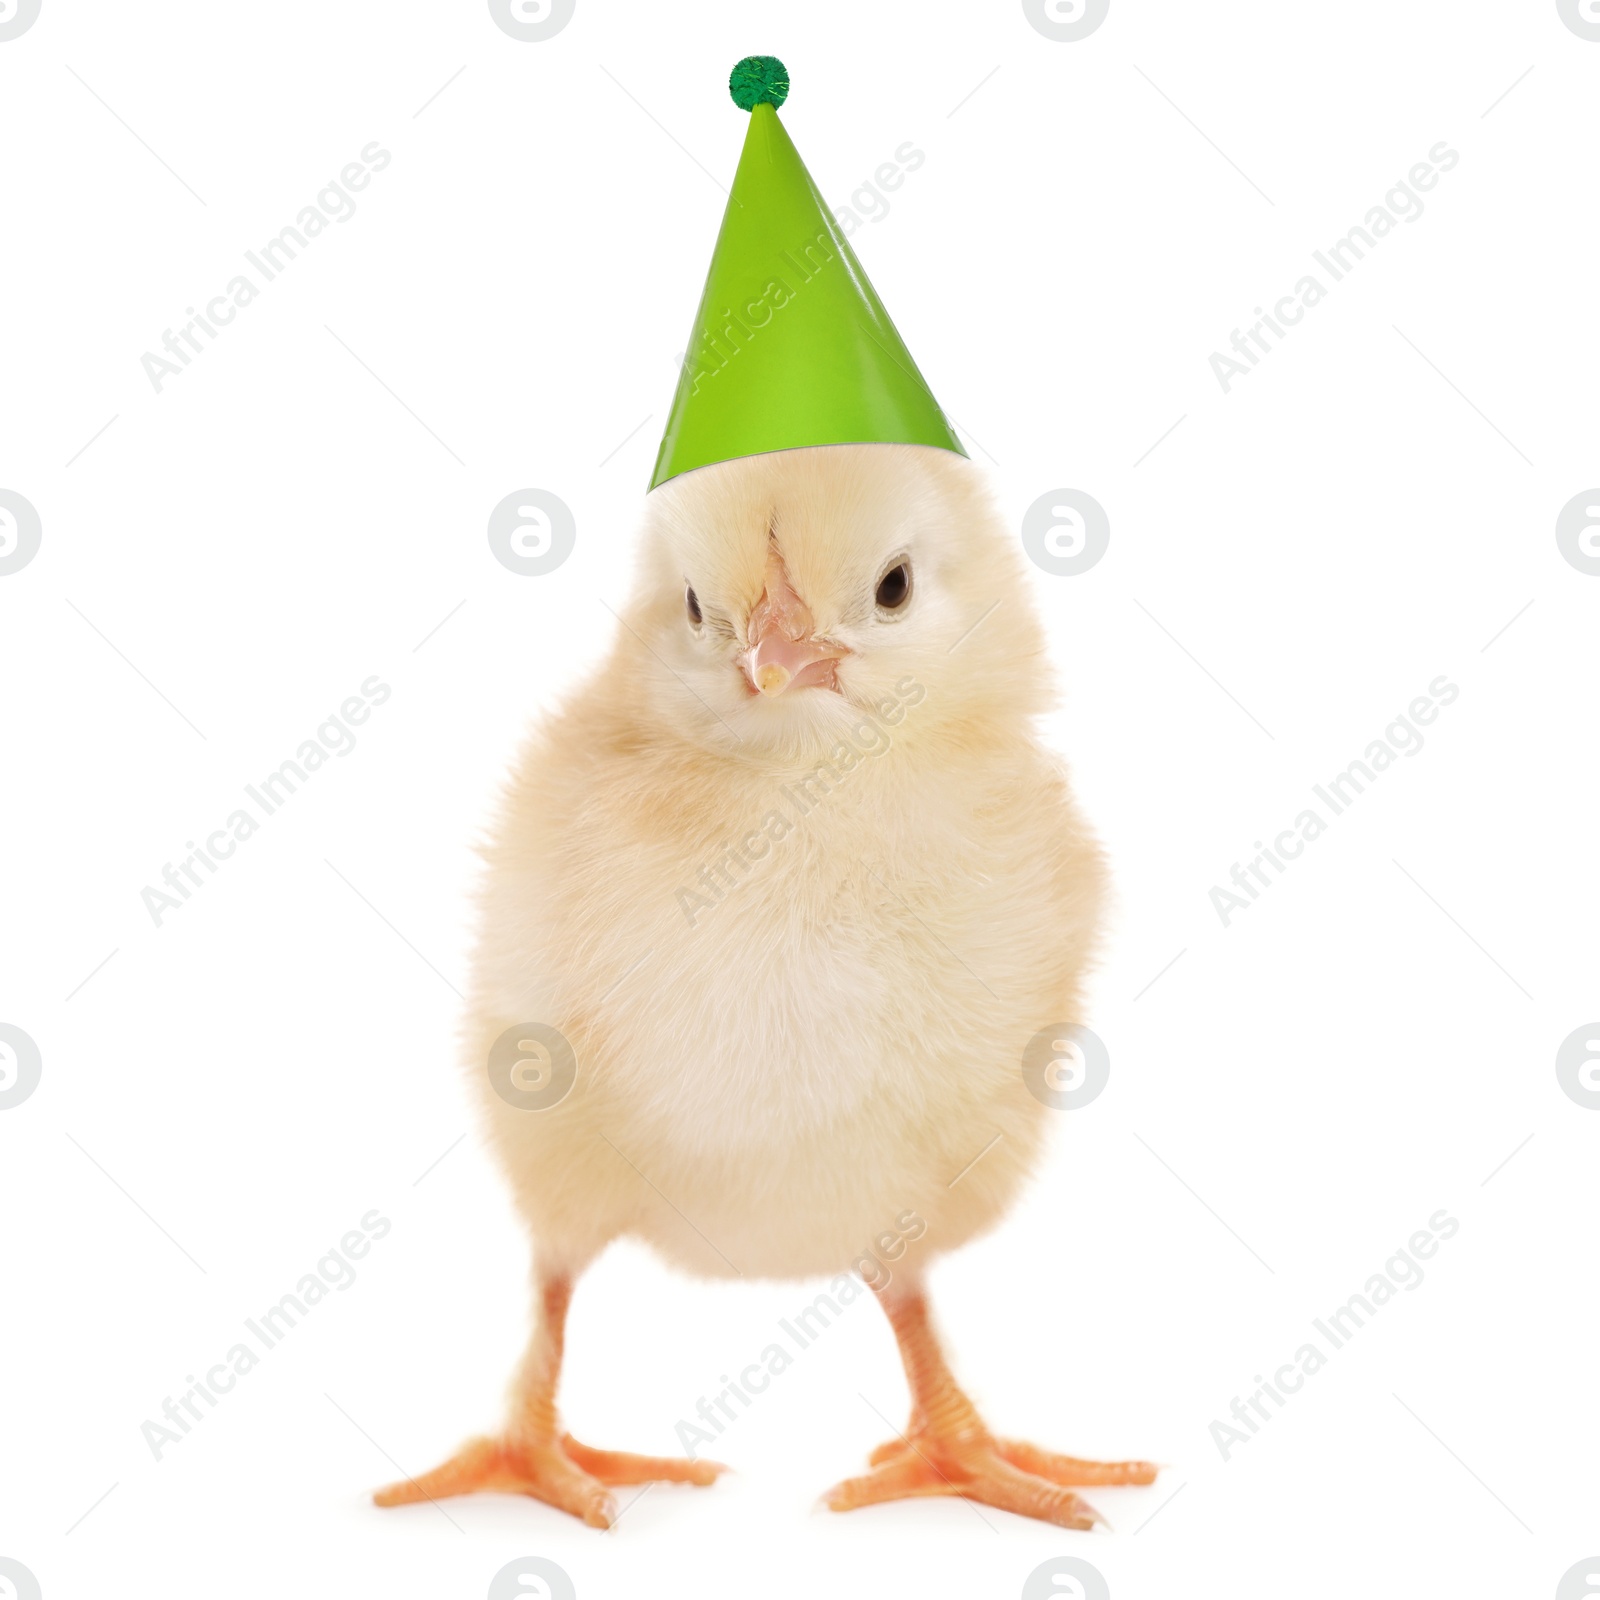 Image of Cute chick with party hat on white background